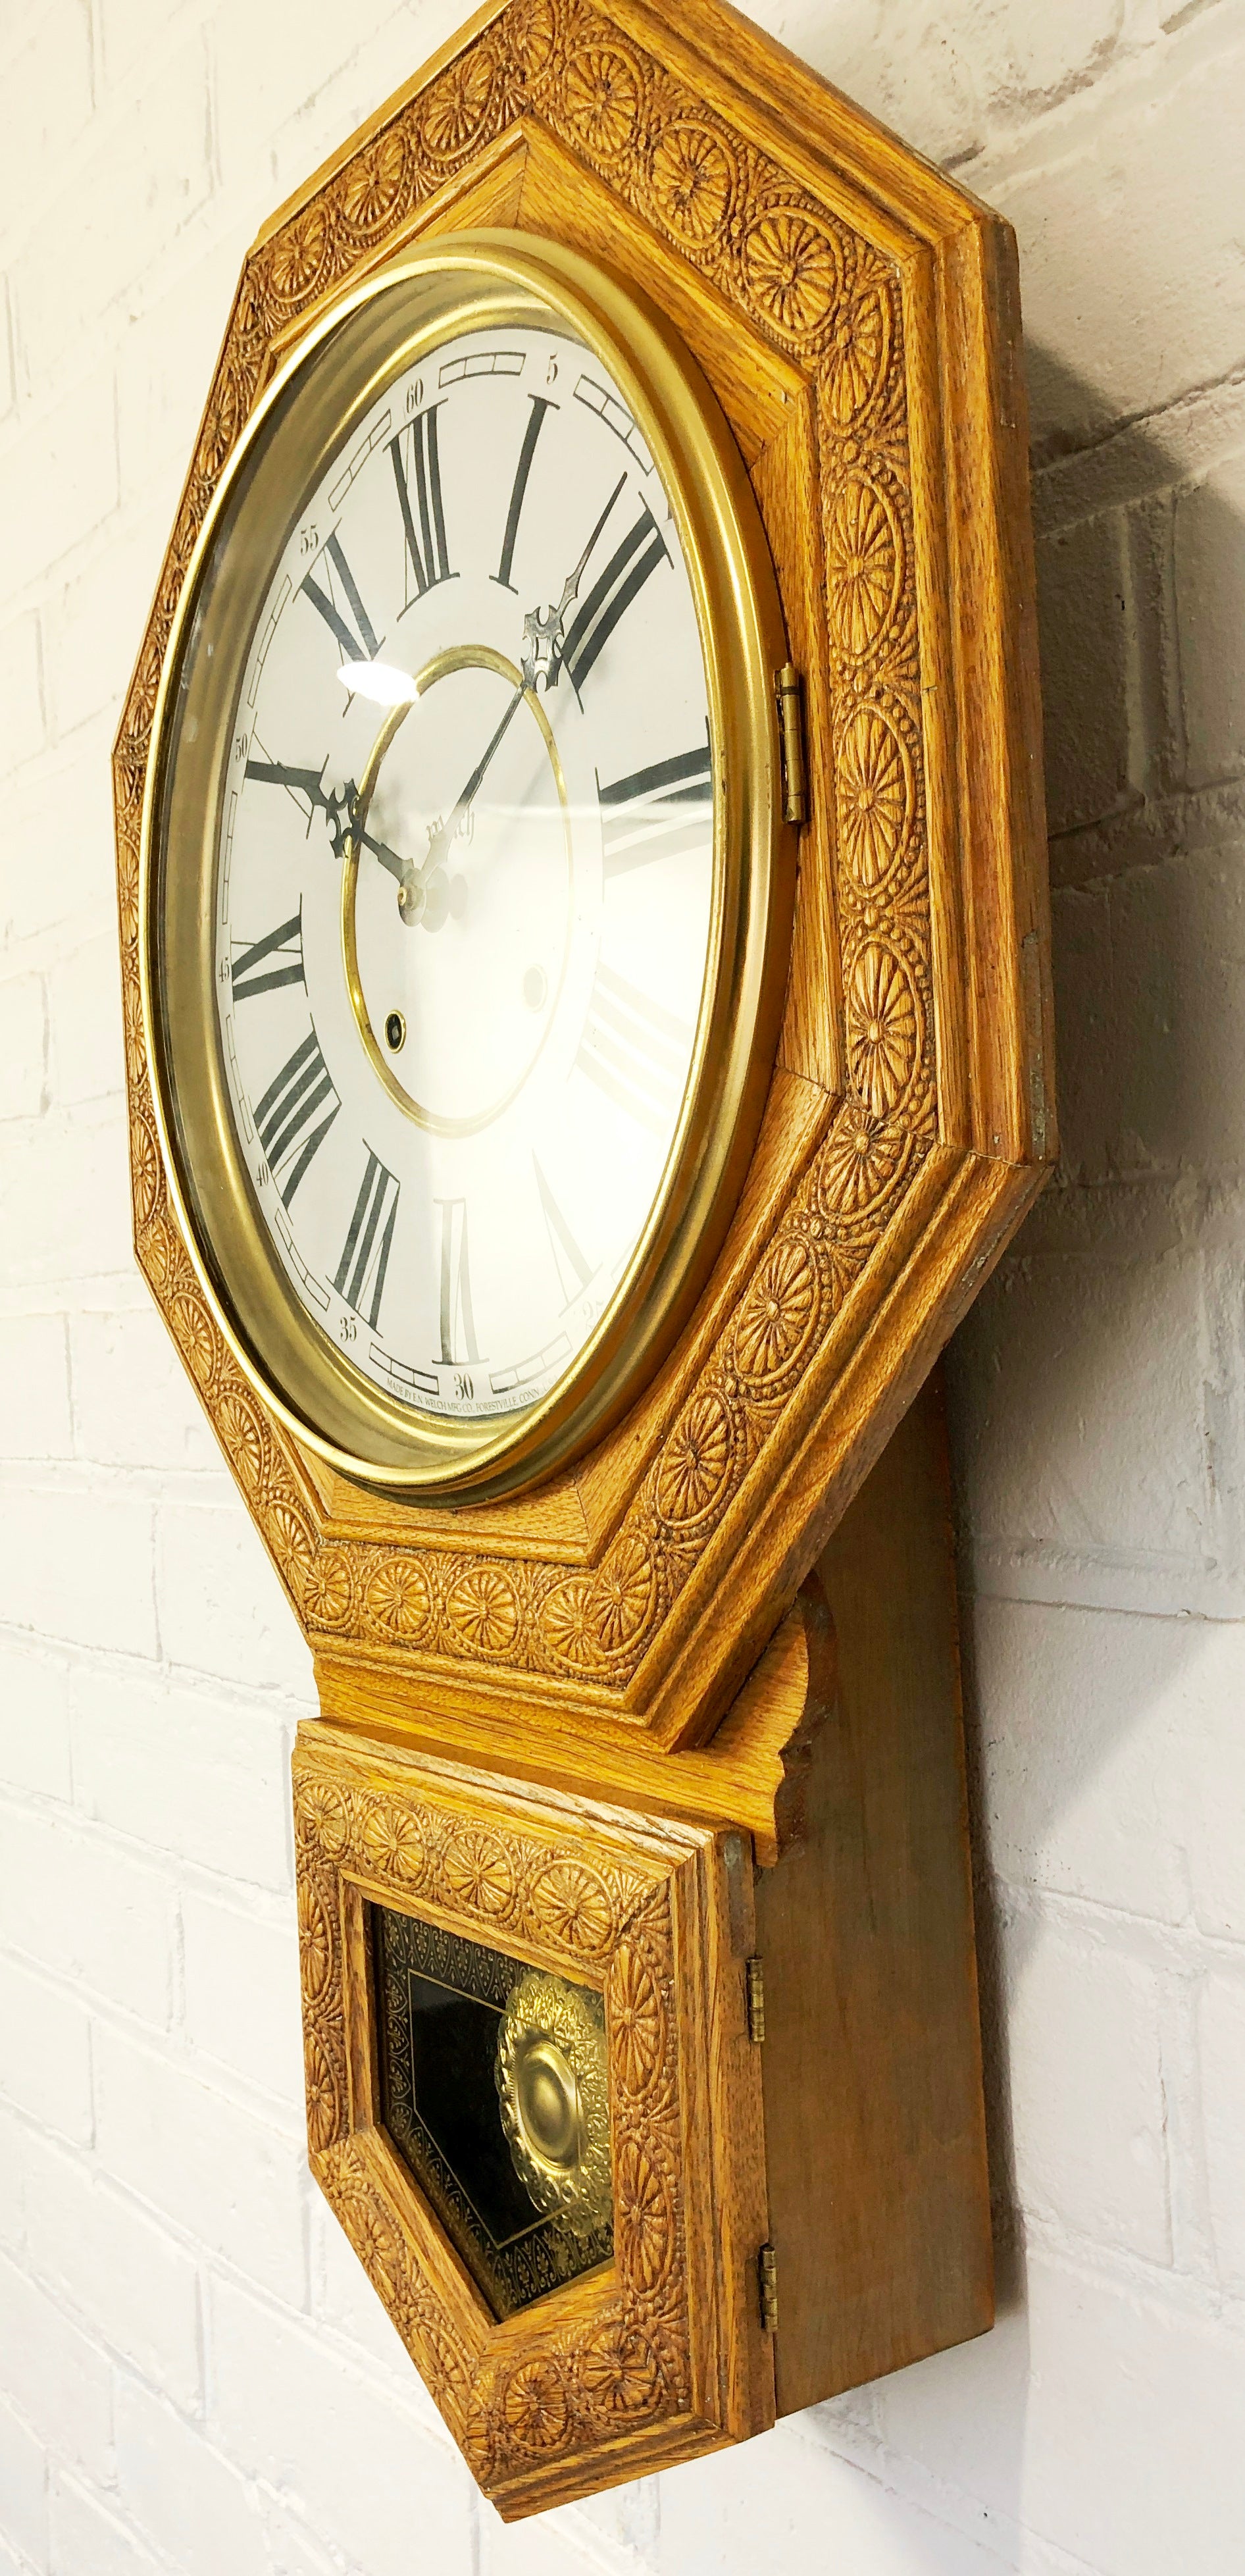 Antique HUGE Welch Octagon Carved Wood Regulator Wall Clock | eXibit collection